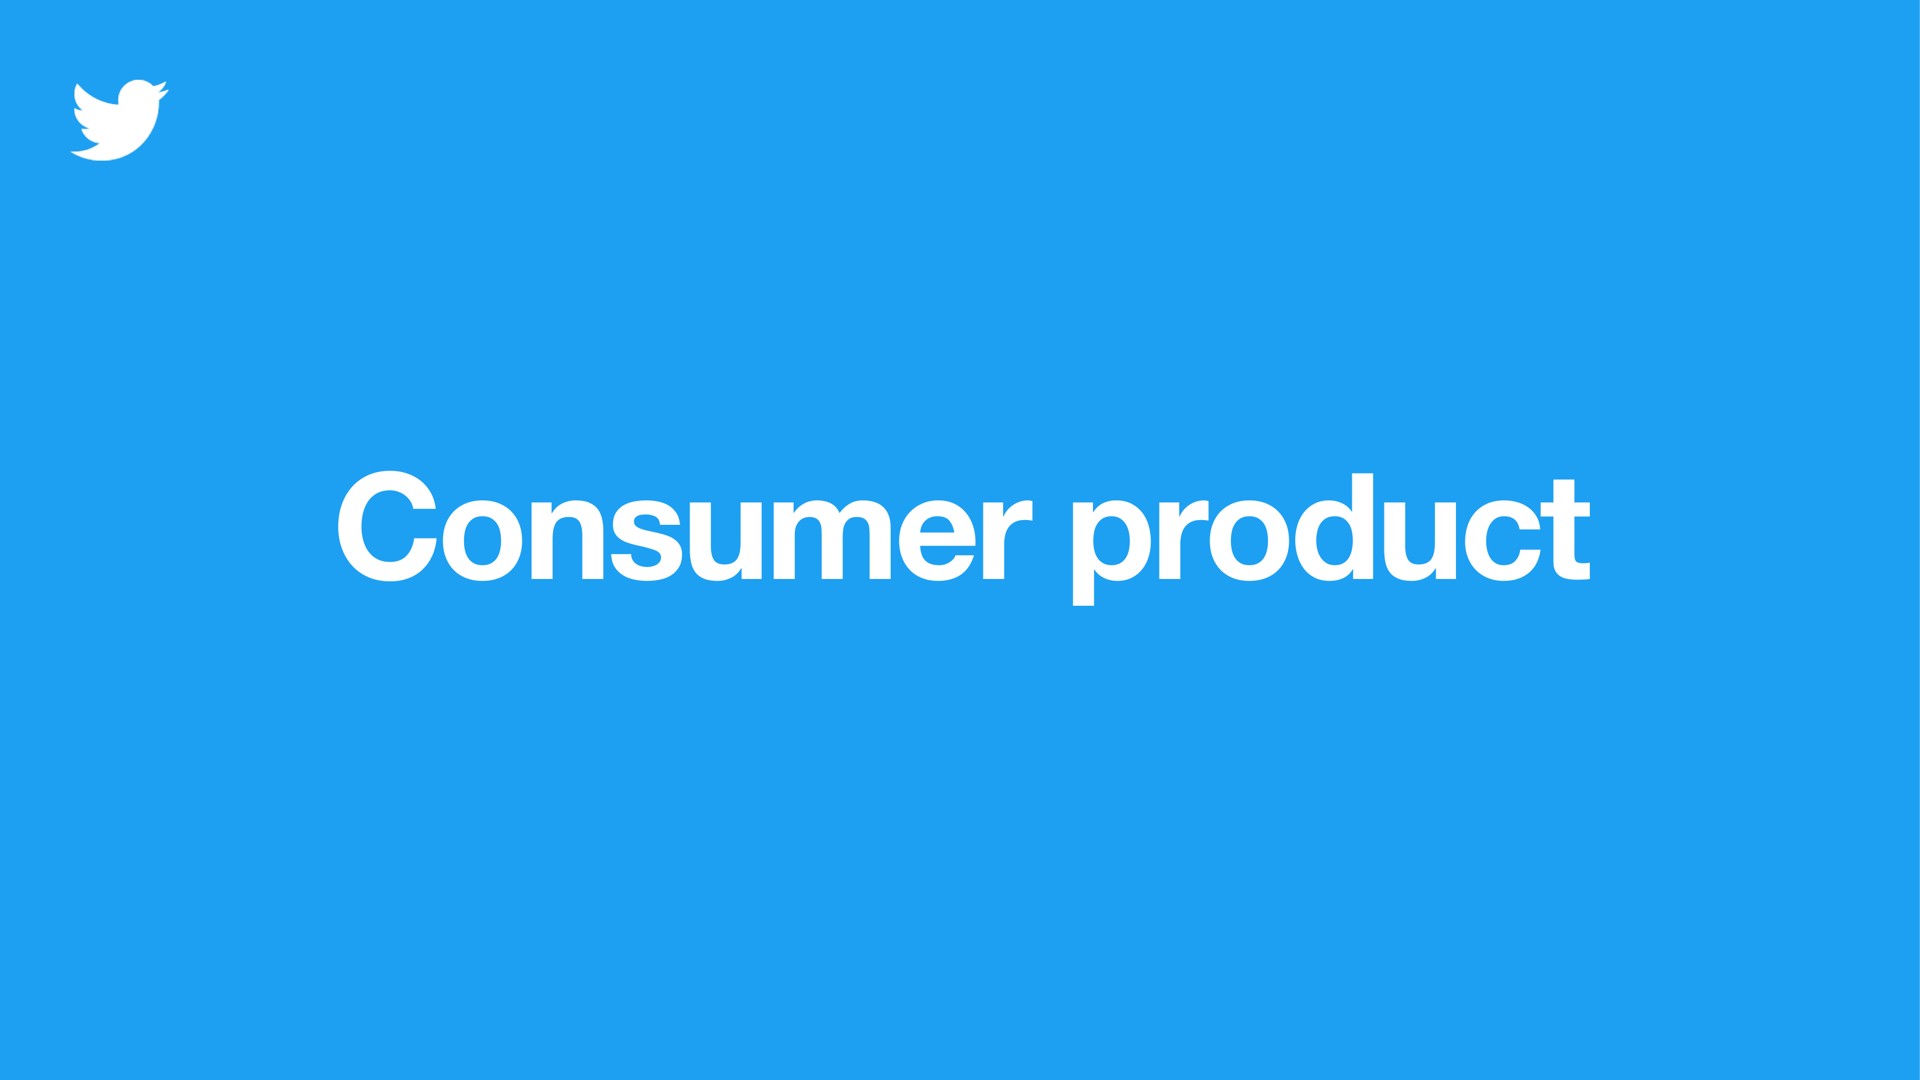 consumer product | Twitter